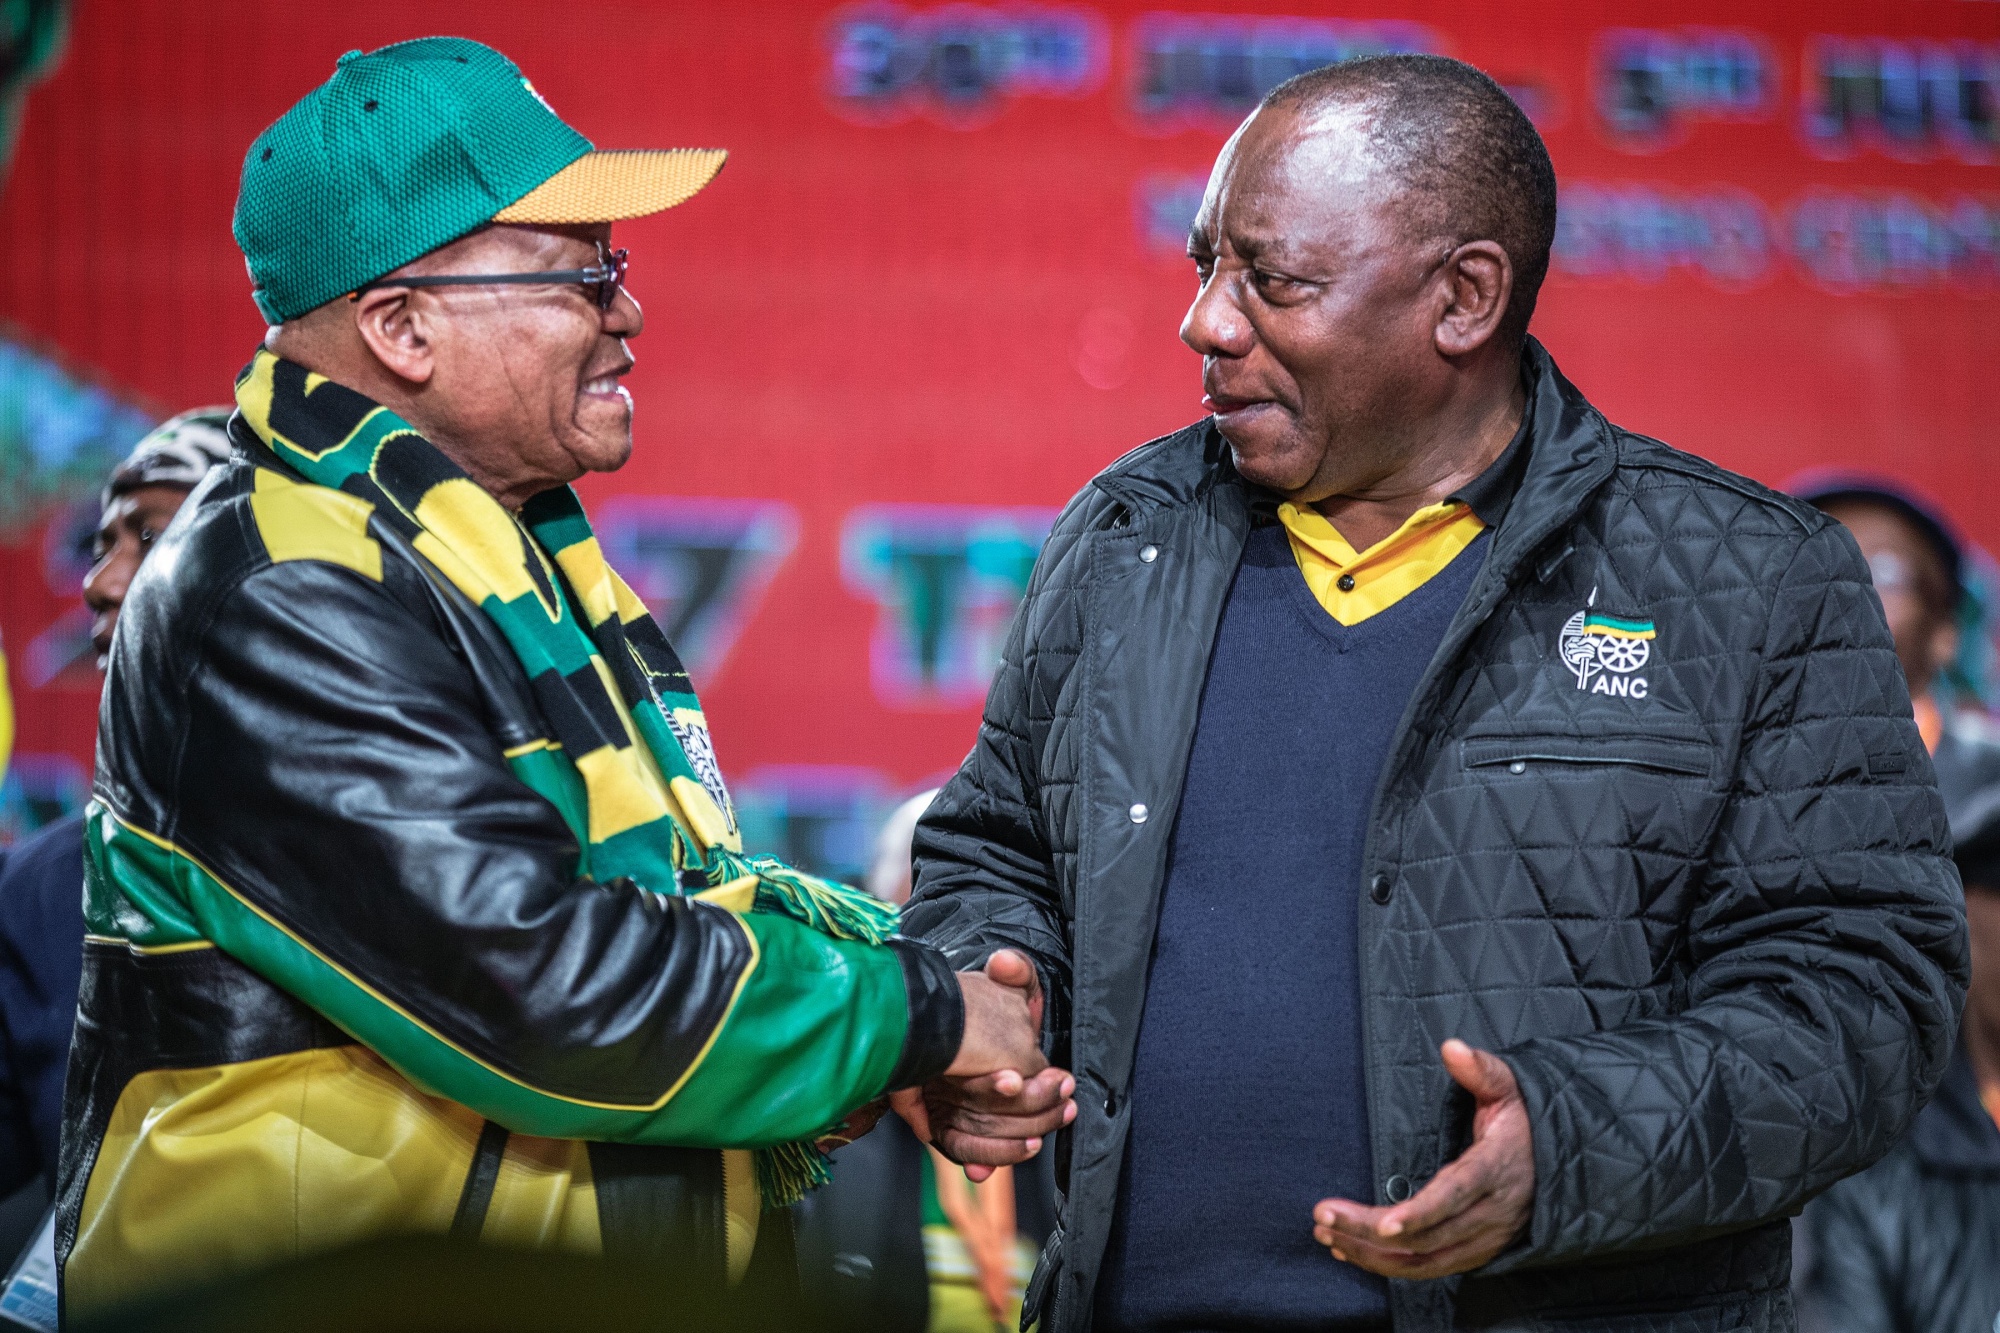 I will not vote for the ANC,' says disgruntled Zuma